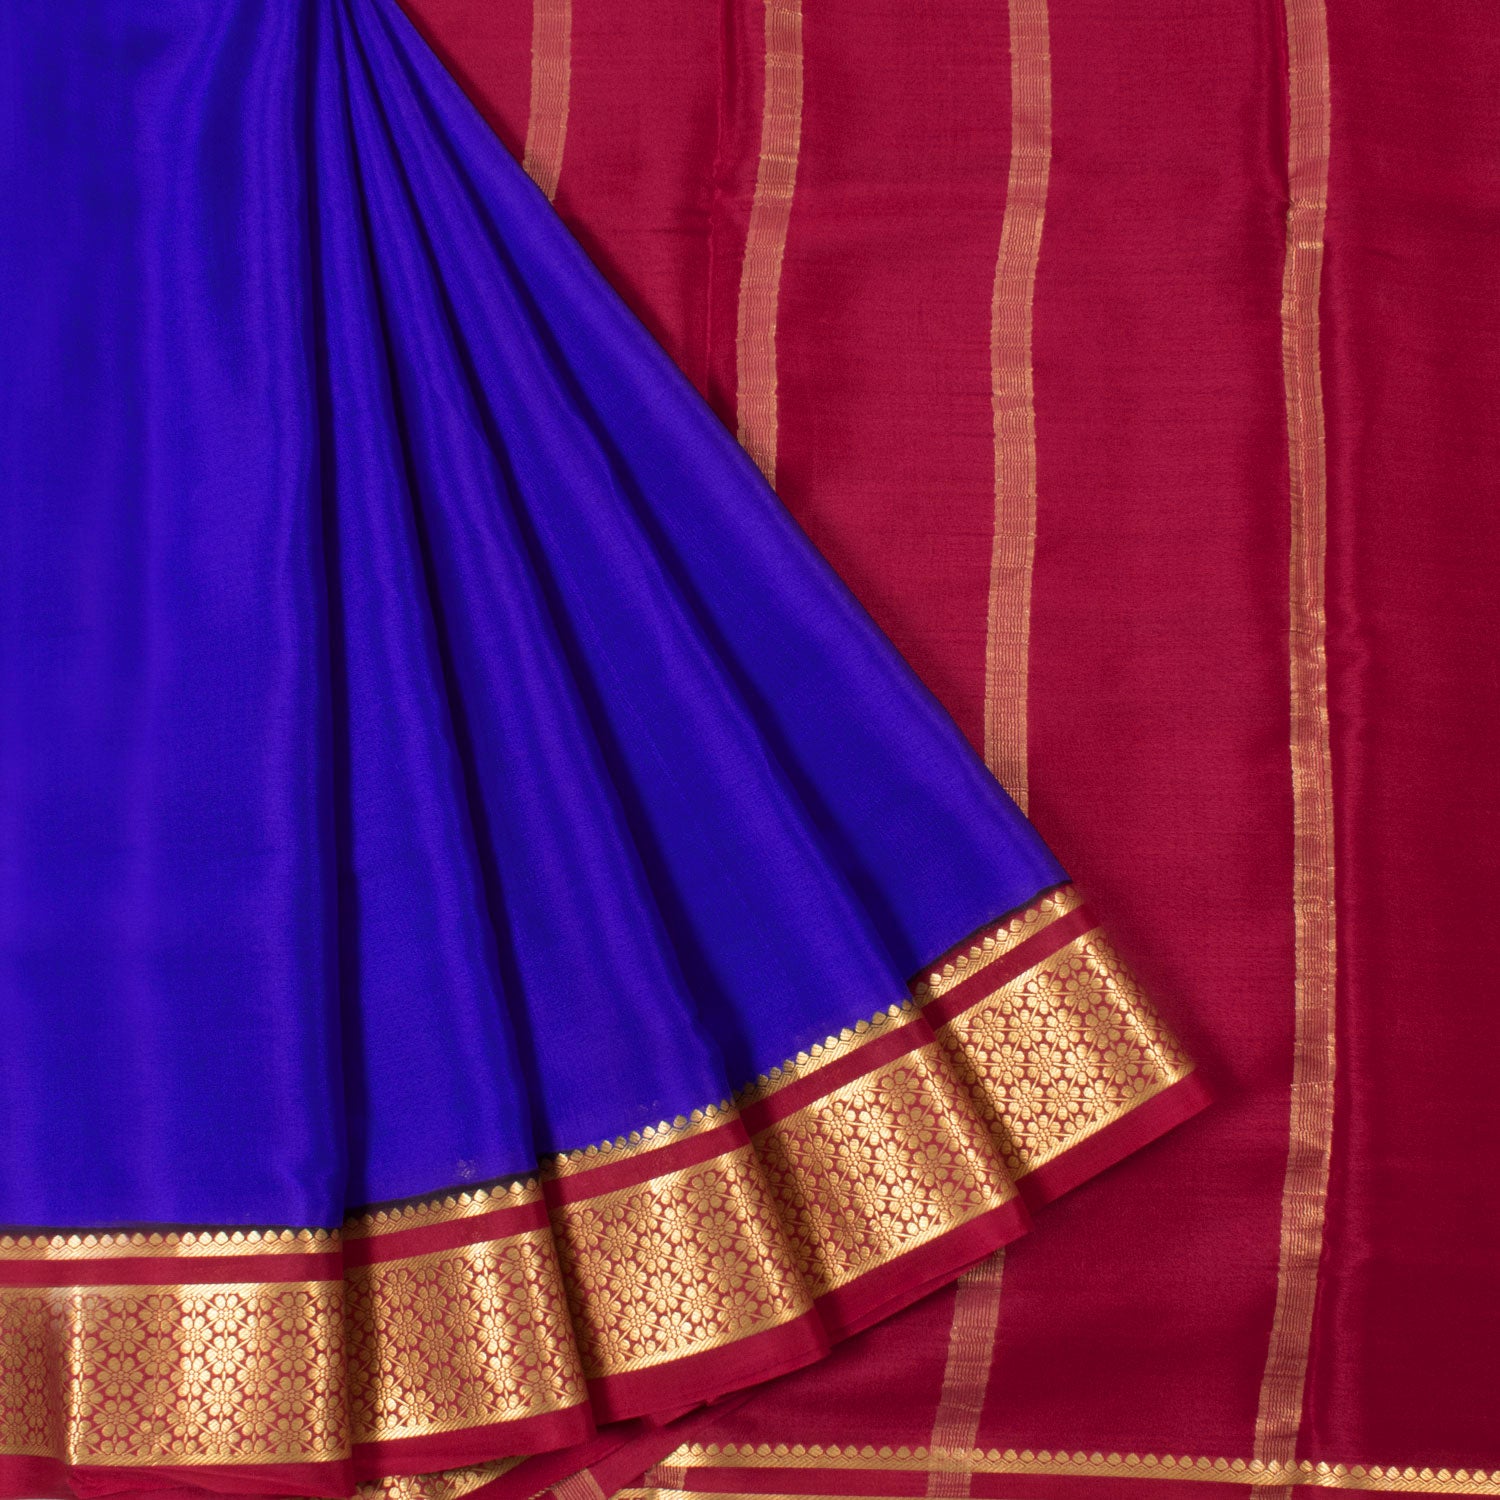 Handwoven Silk Sarees | Price Rs. 20,000 - Rs. 30,000 – tagged 